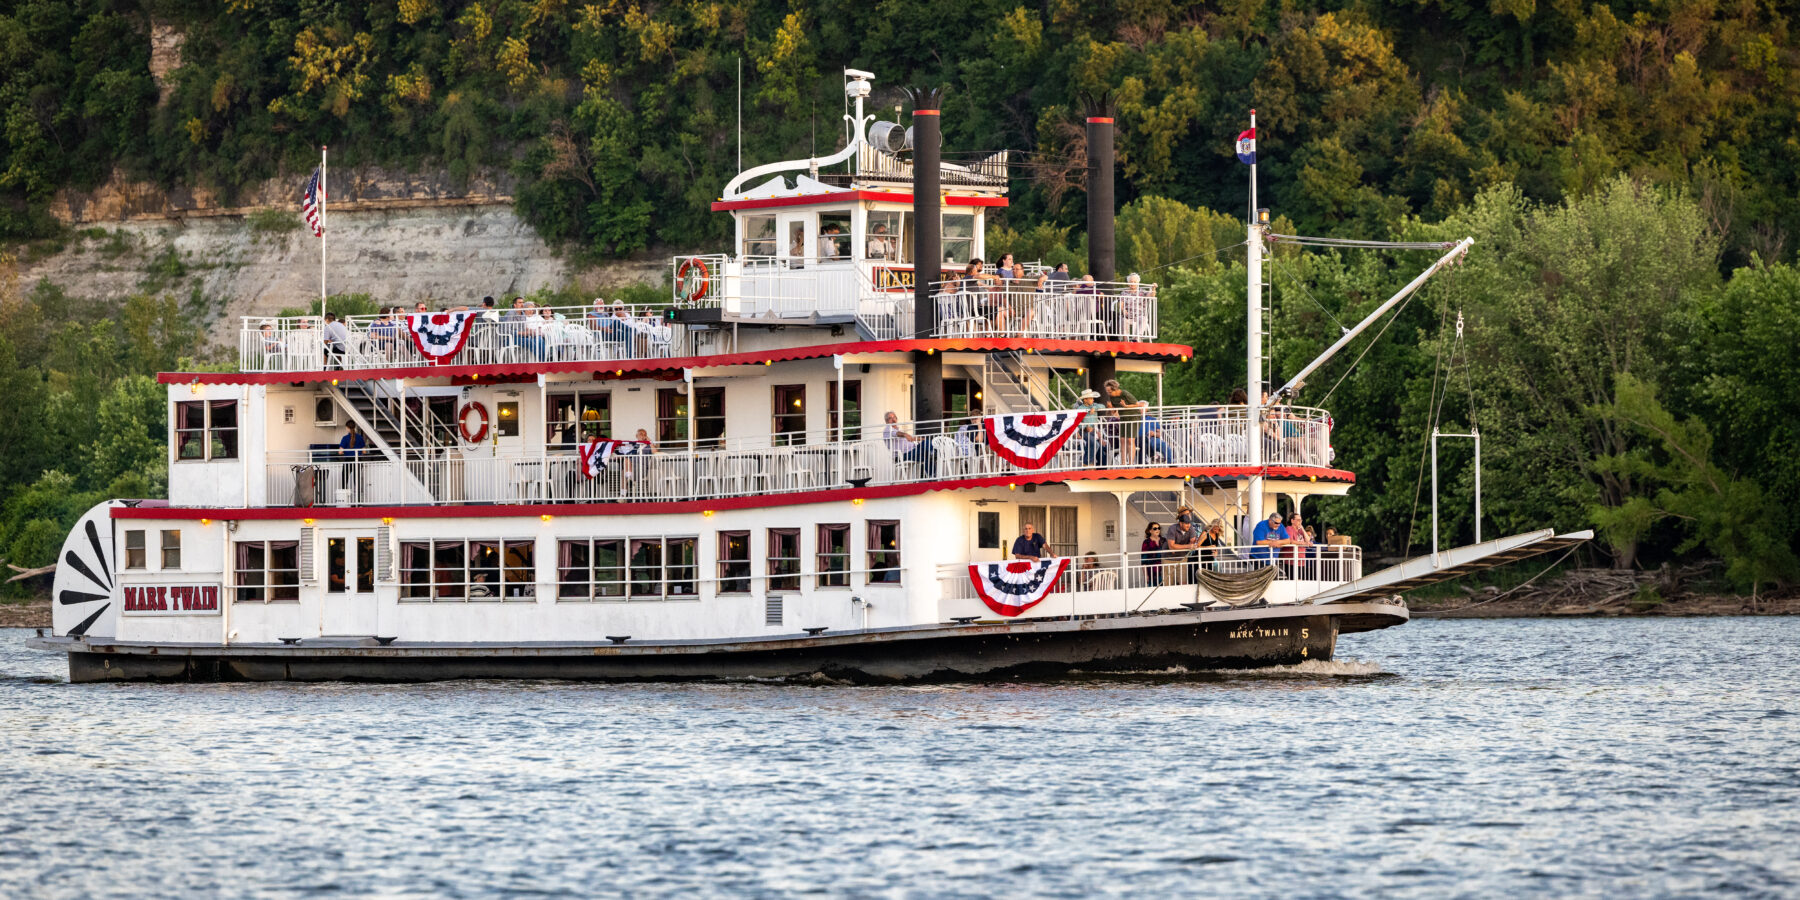 riverboat rides on the mississippi river